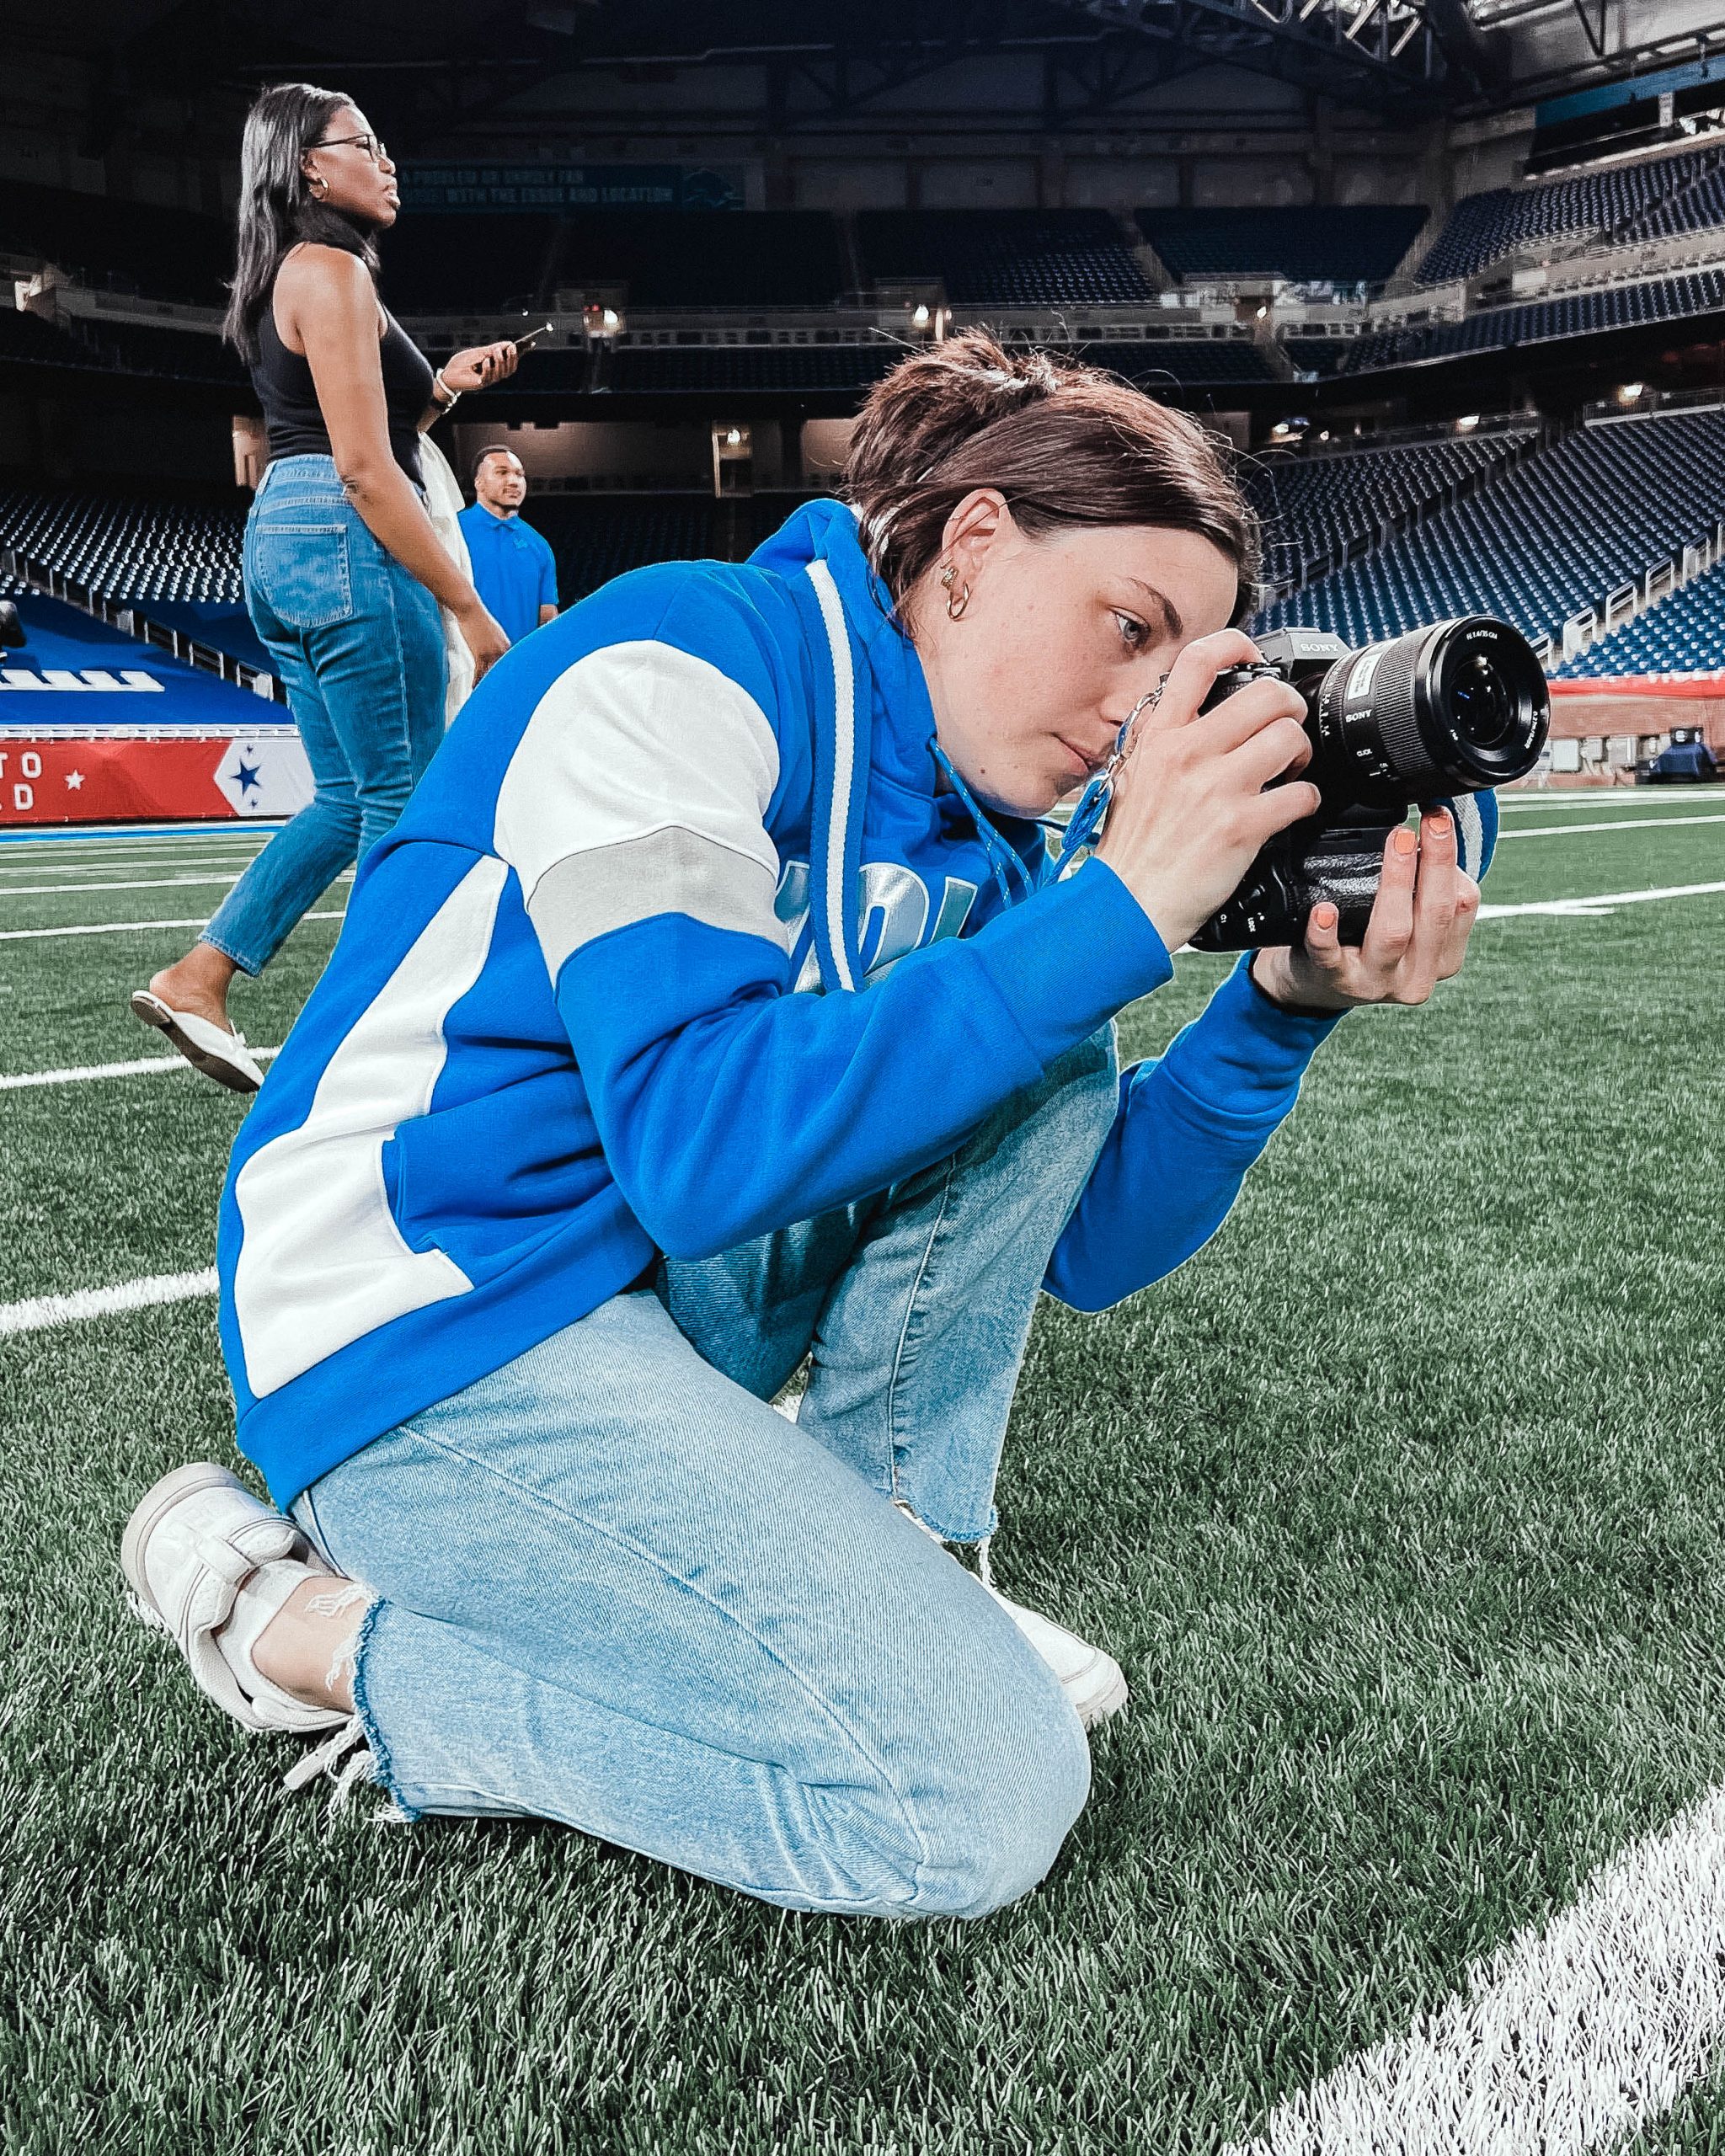 Katie Quinlan taking photos while on the field in Lions sweatshirt.